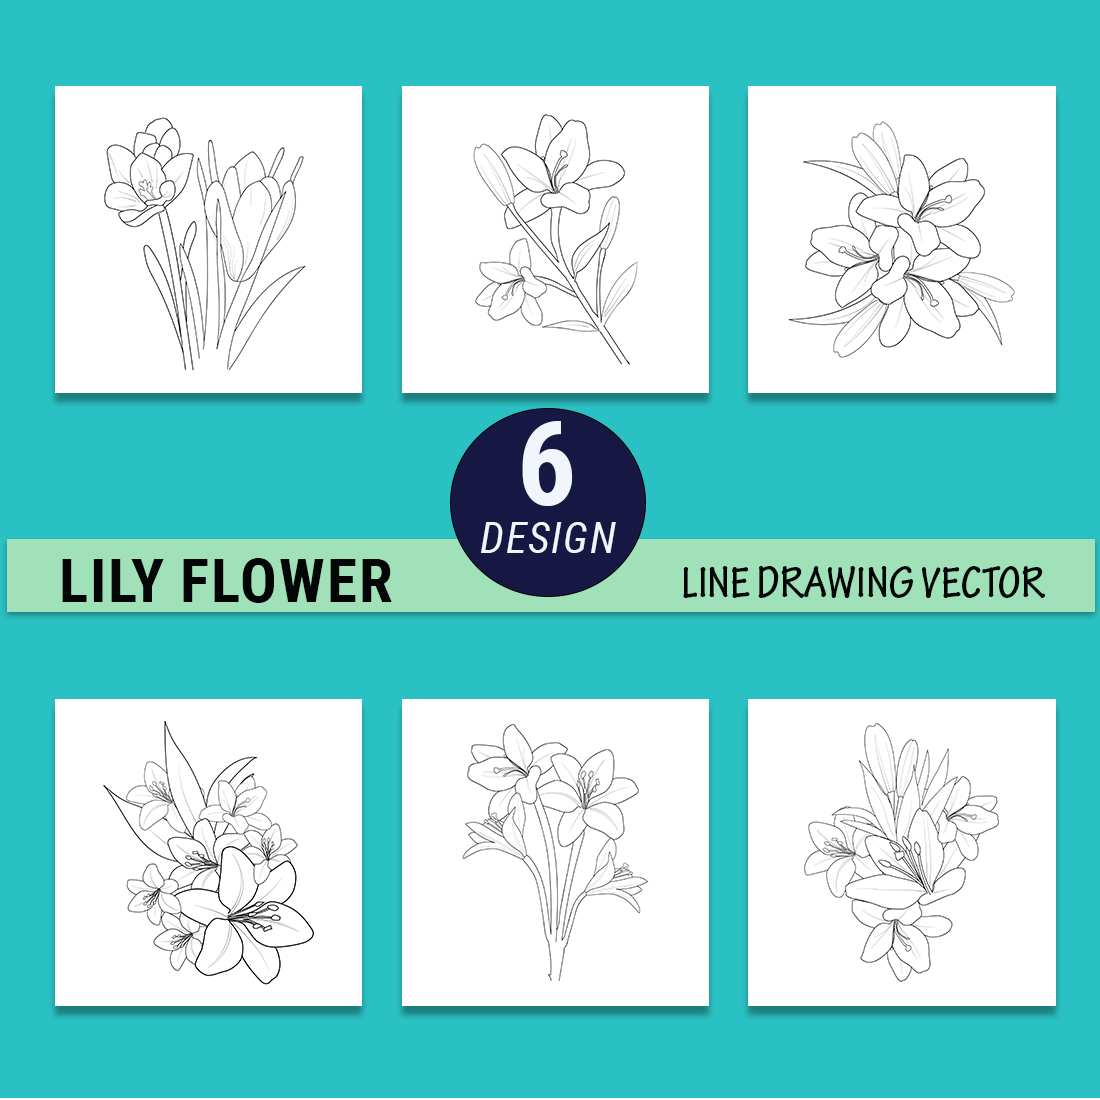 lily flower pencil art, lily flower outline drawing, lily flower pattern designs, pencil drawing lilys, simple lily flower drawing for kids cover image.